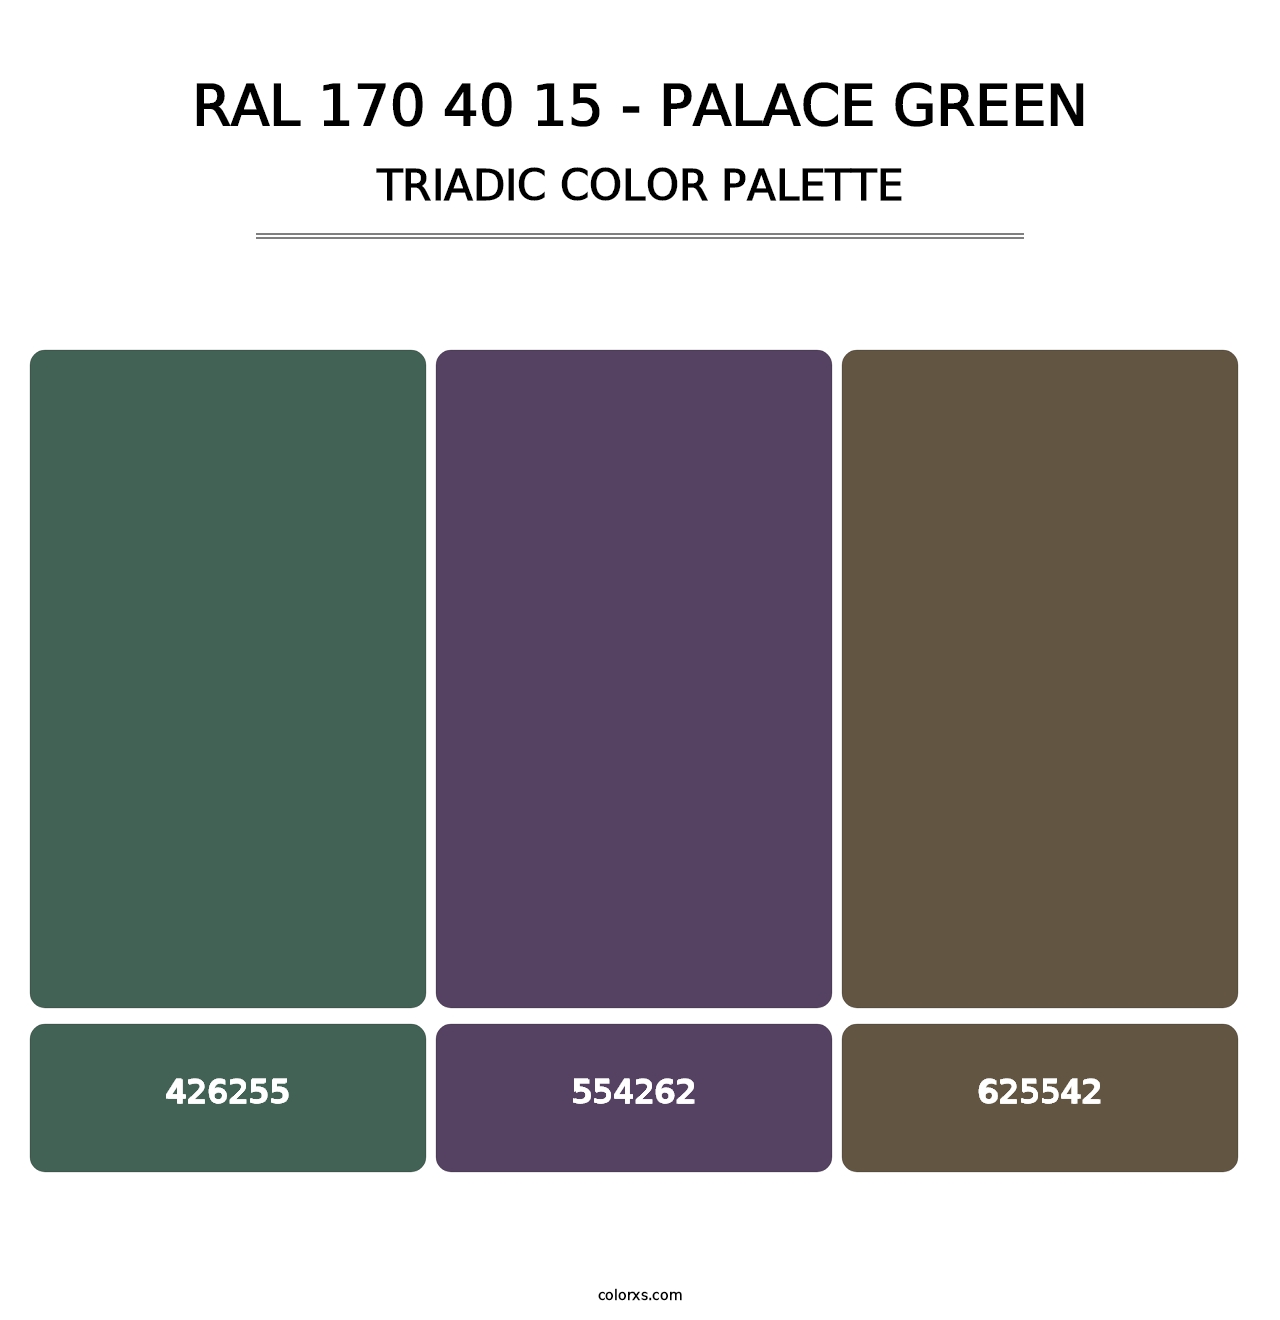 RAL 170 40 15 - Palace Green - Triadic Color Palette